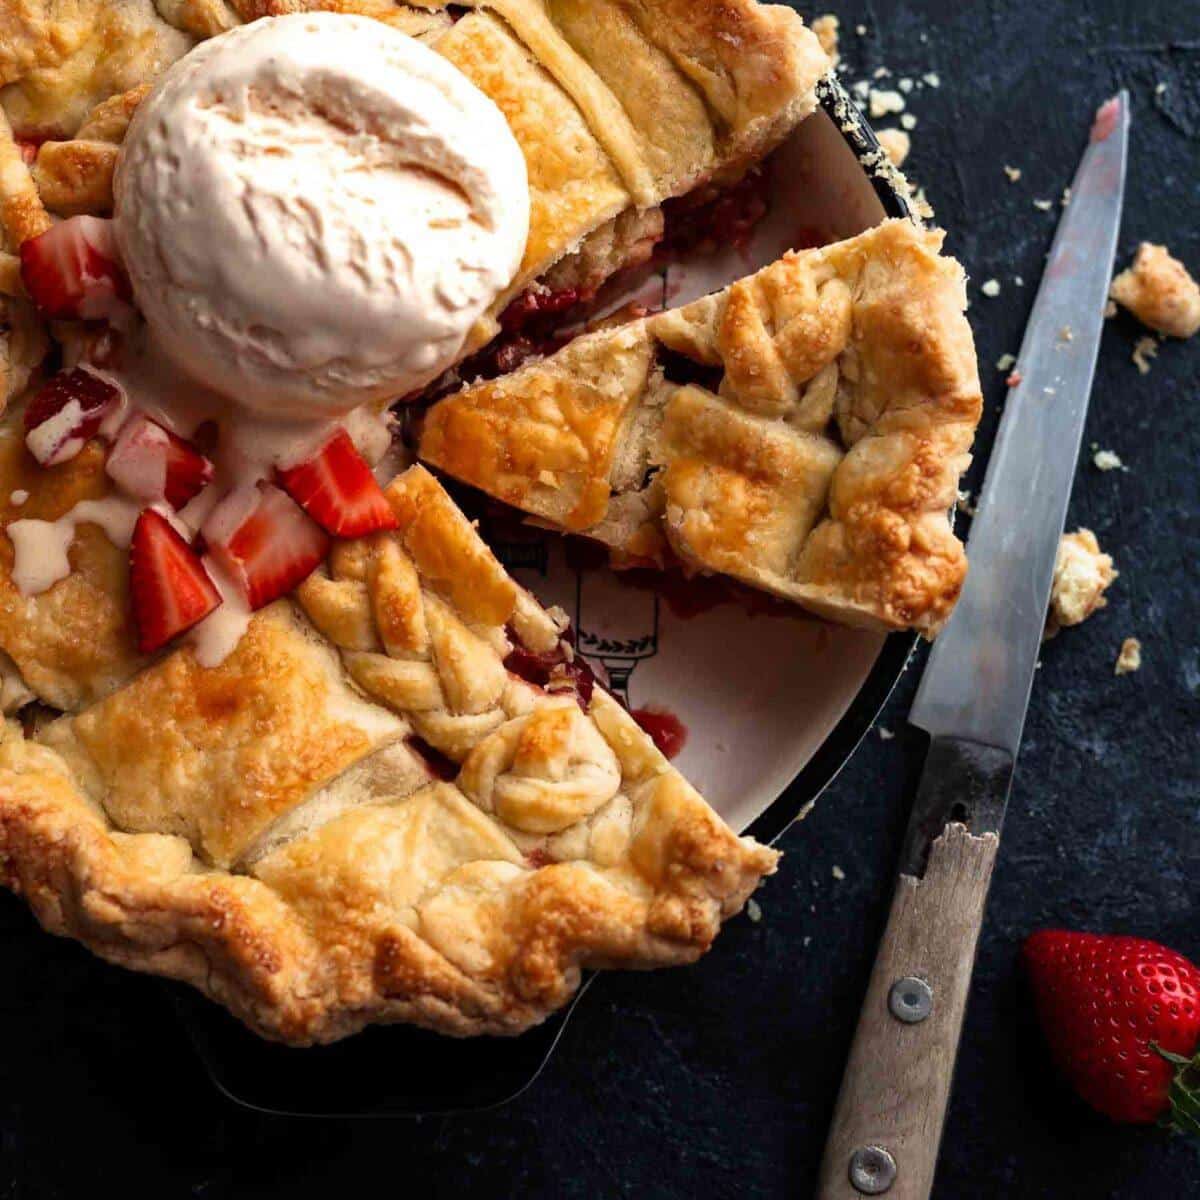 a sliced strawberry rhubarb pie in a baking dish with ice cream dollop on it and a knife next to it